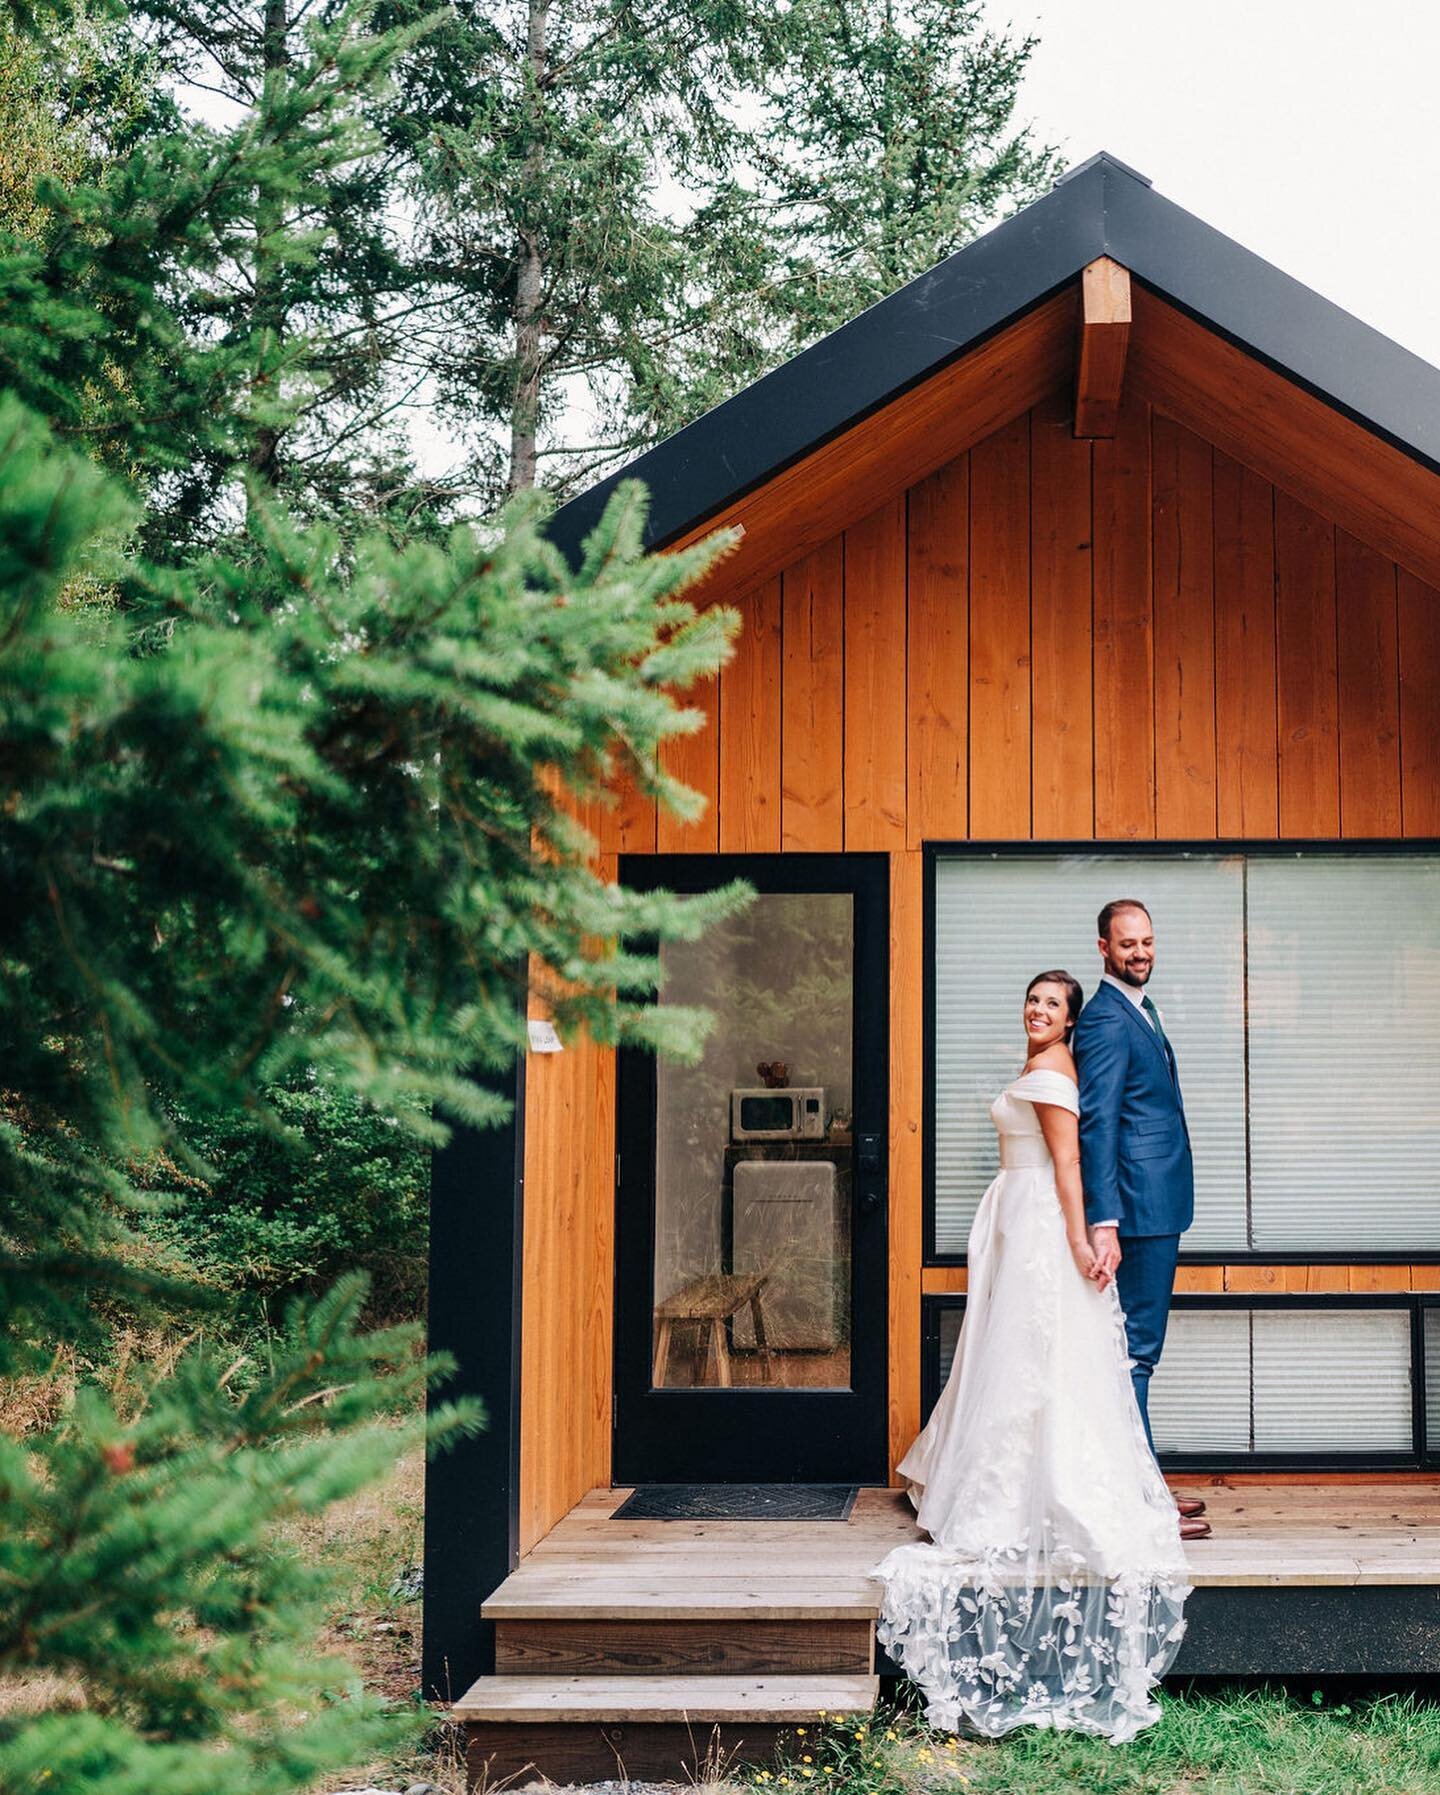 We love how L&amp;L took photos on the front porch of one of our guest homes and had their grand entrance at the event barn! The perfect backdrops ✨ #weddingvenue #backdropwedding #saltwaterfarmwedding #wedding #sanjuanislandvenue